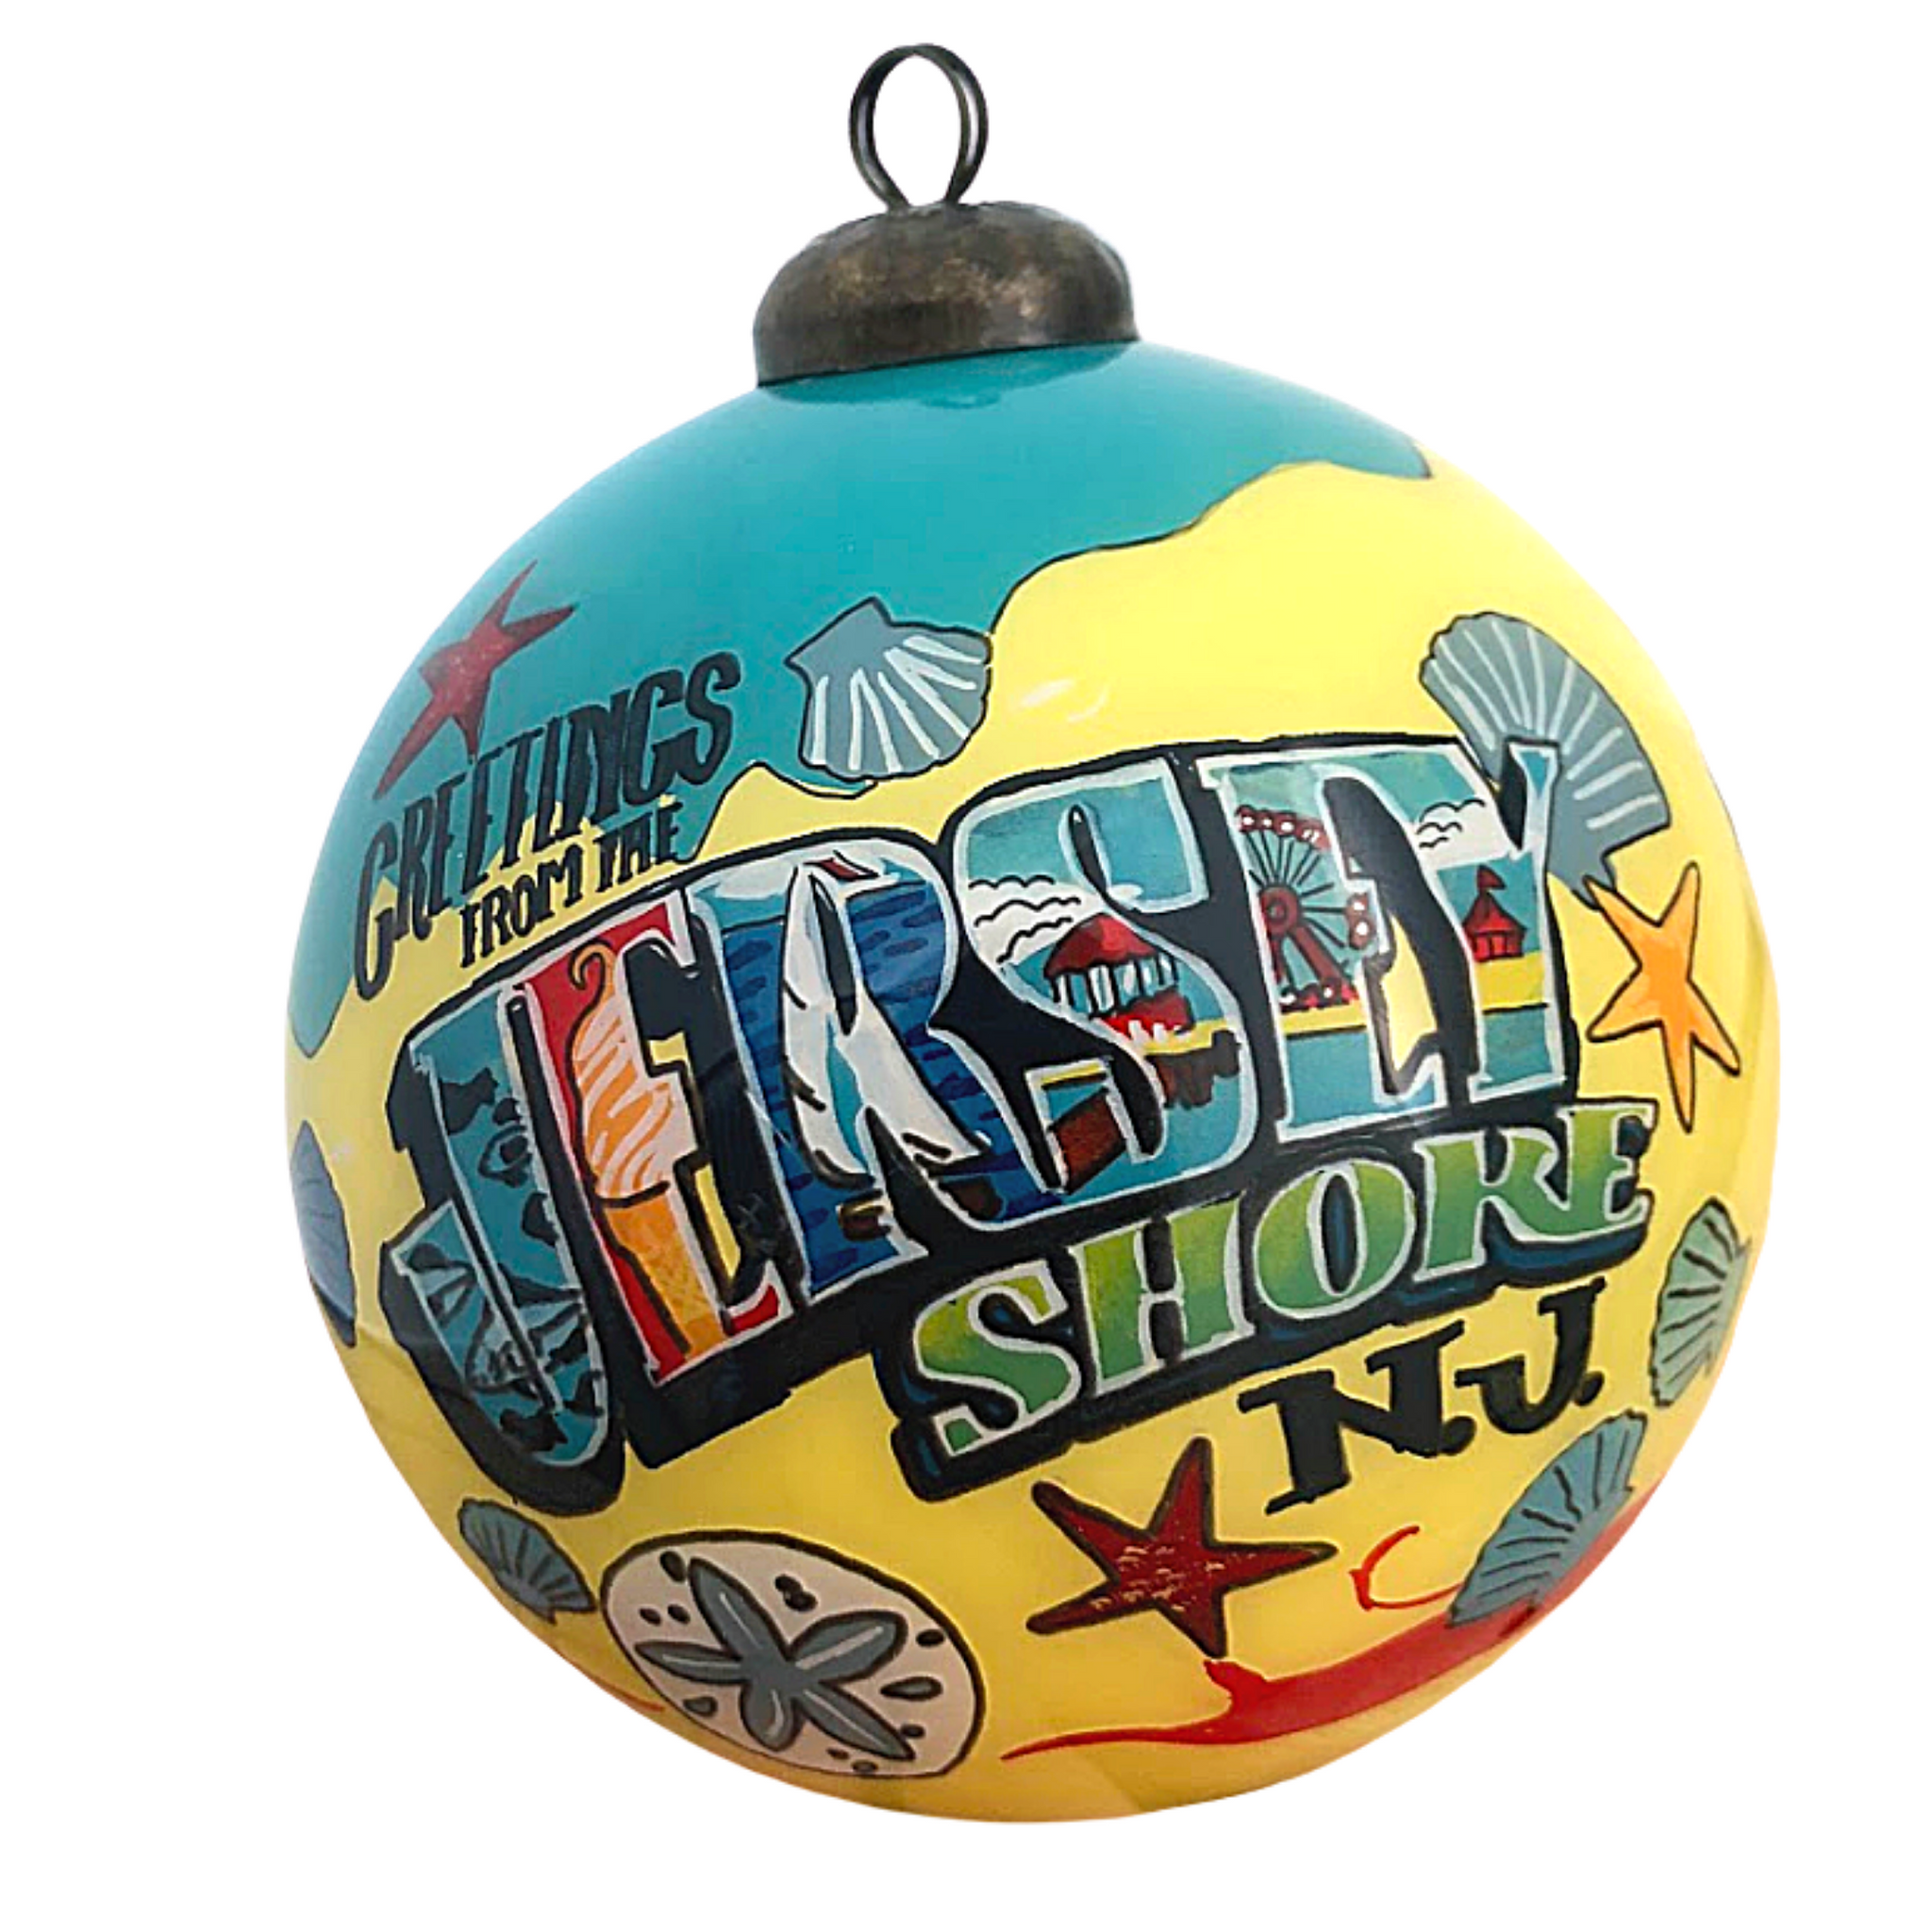 Greetings From The Jersey Shore Ornament